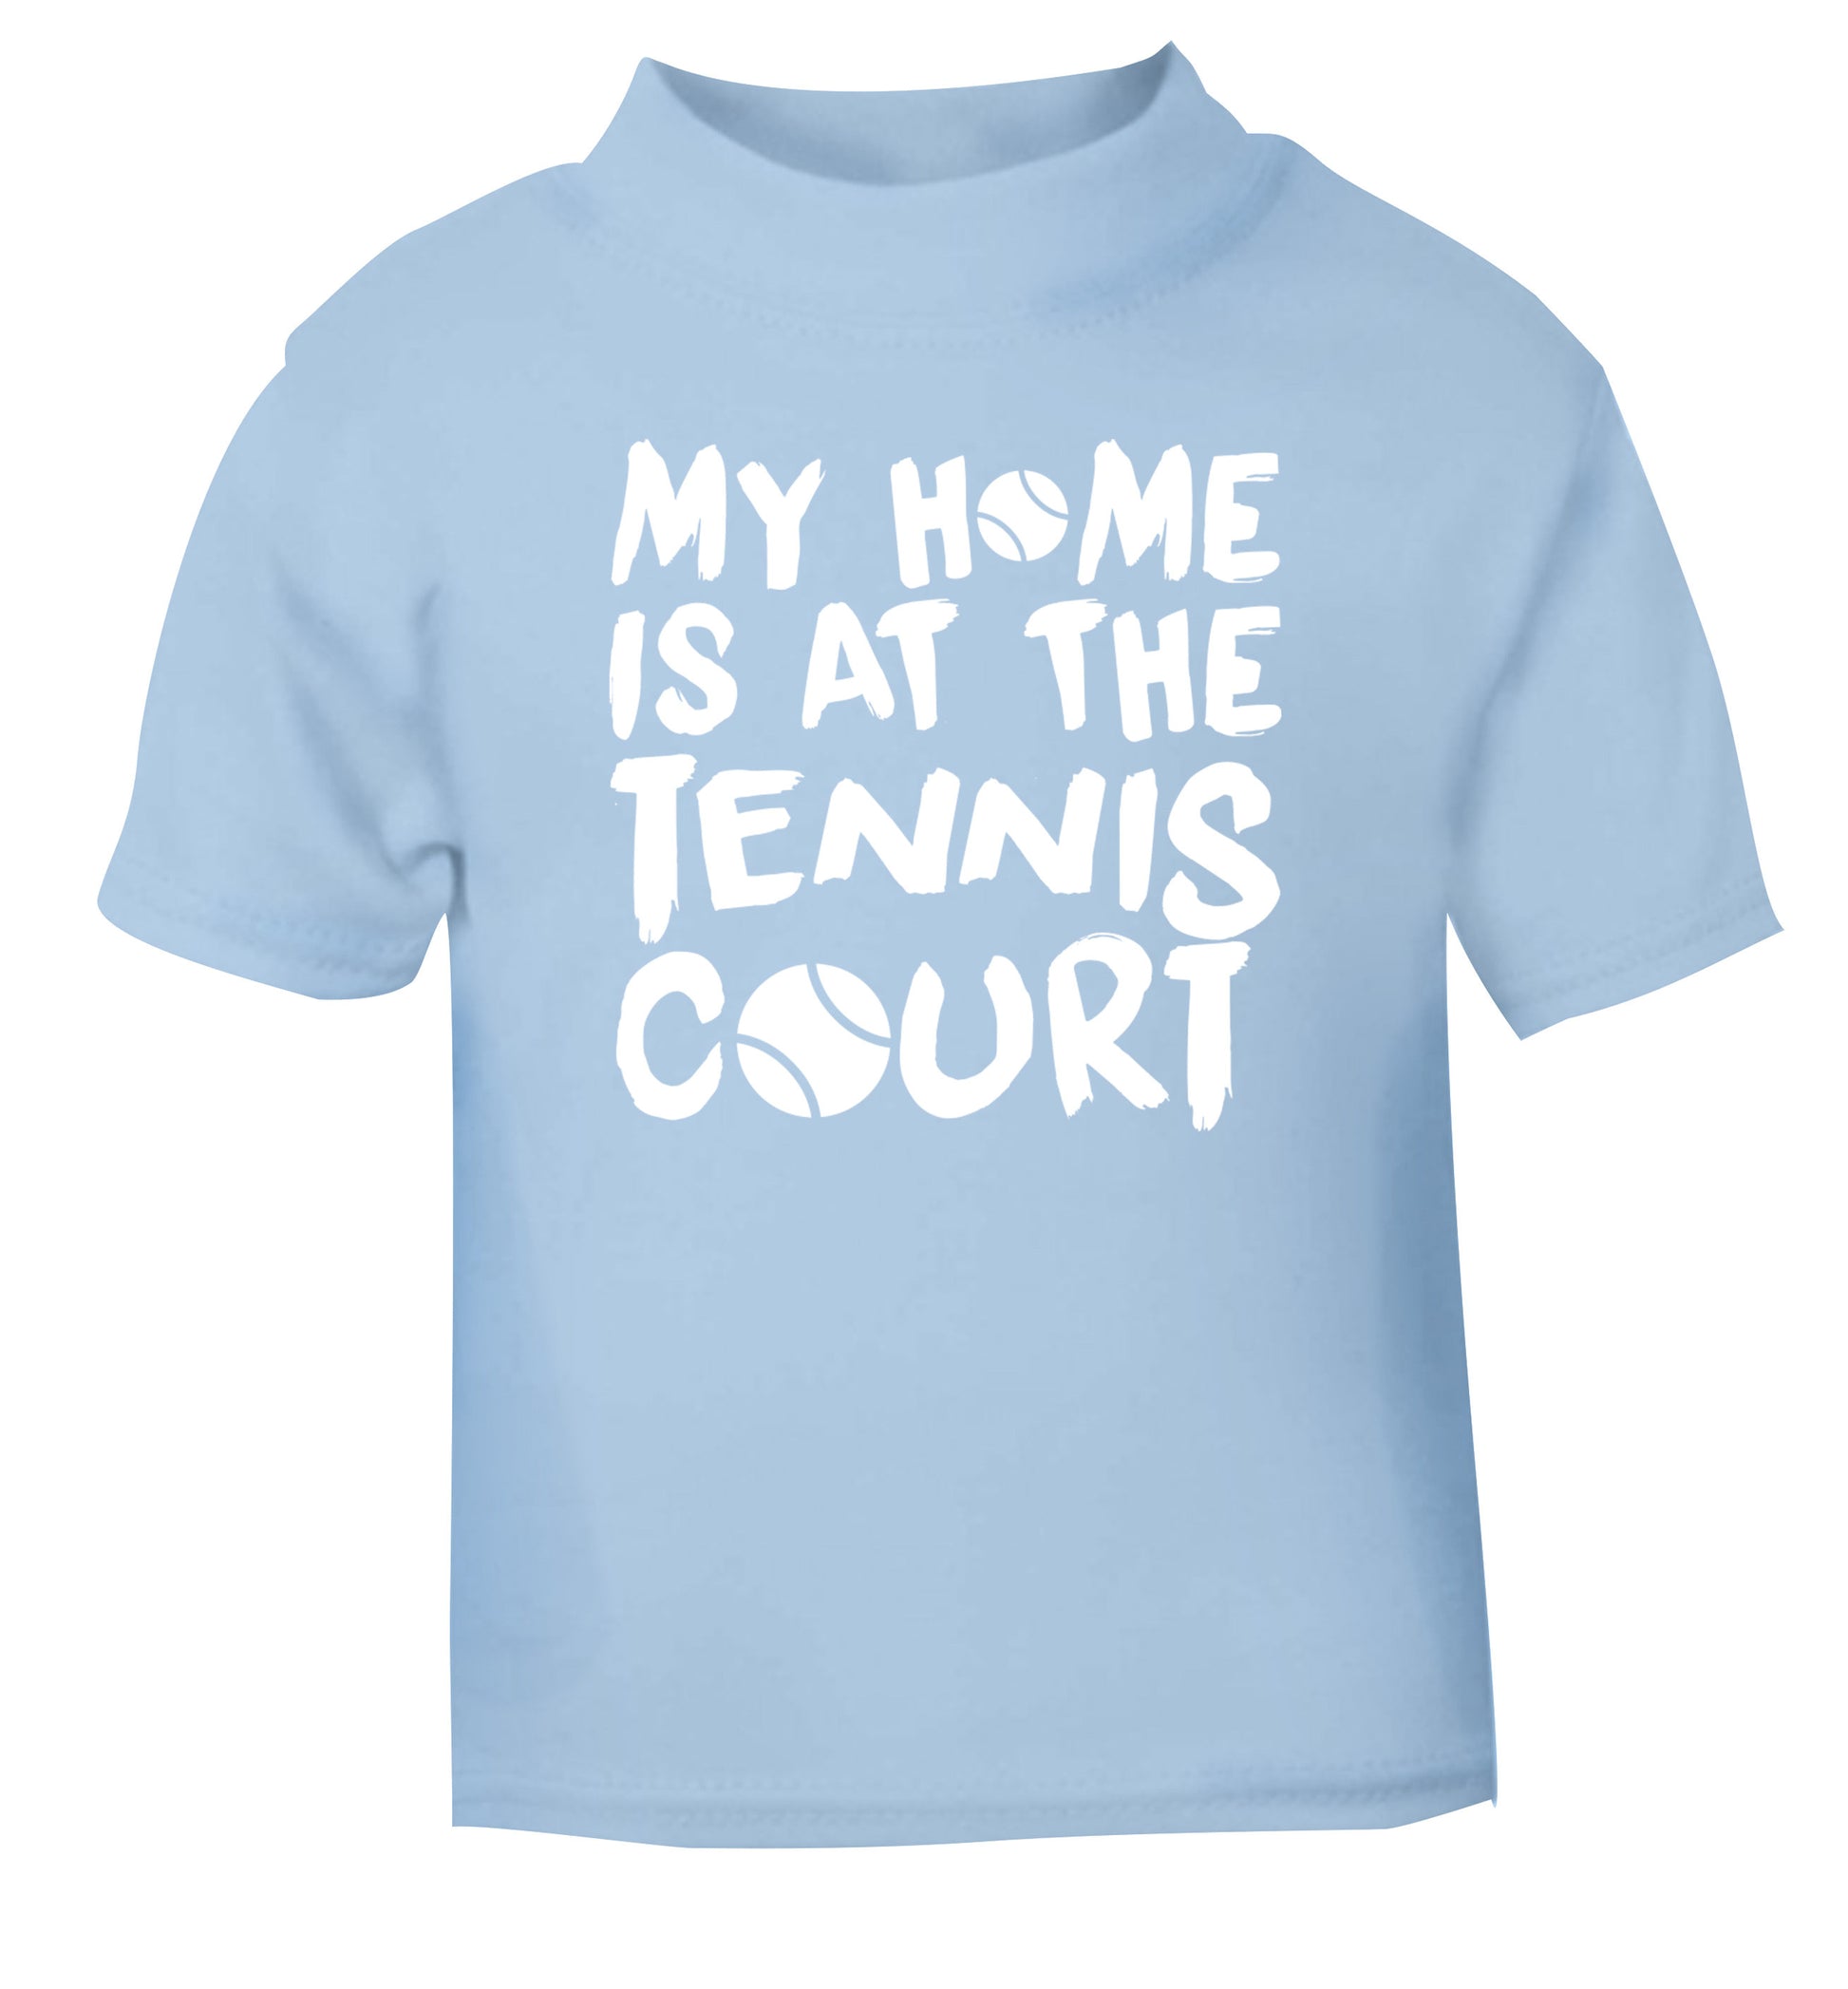 My home is at the tennis court light blue Baby Toddler Tshirt 2 Years